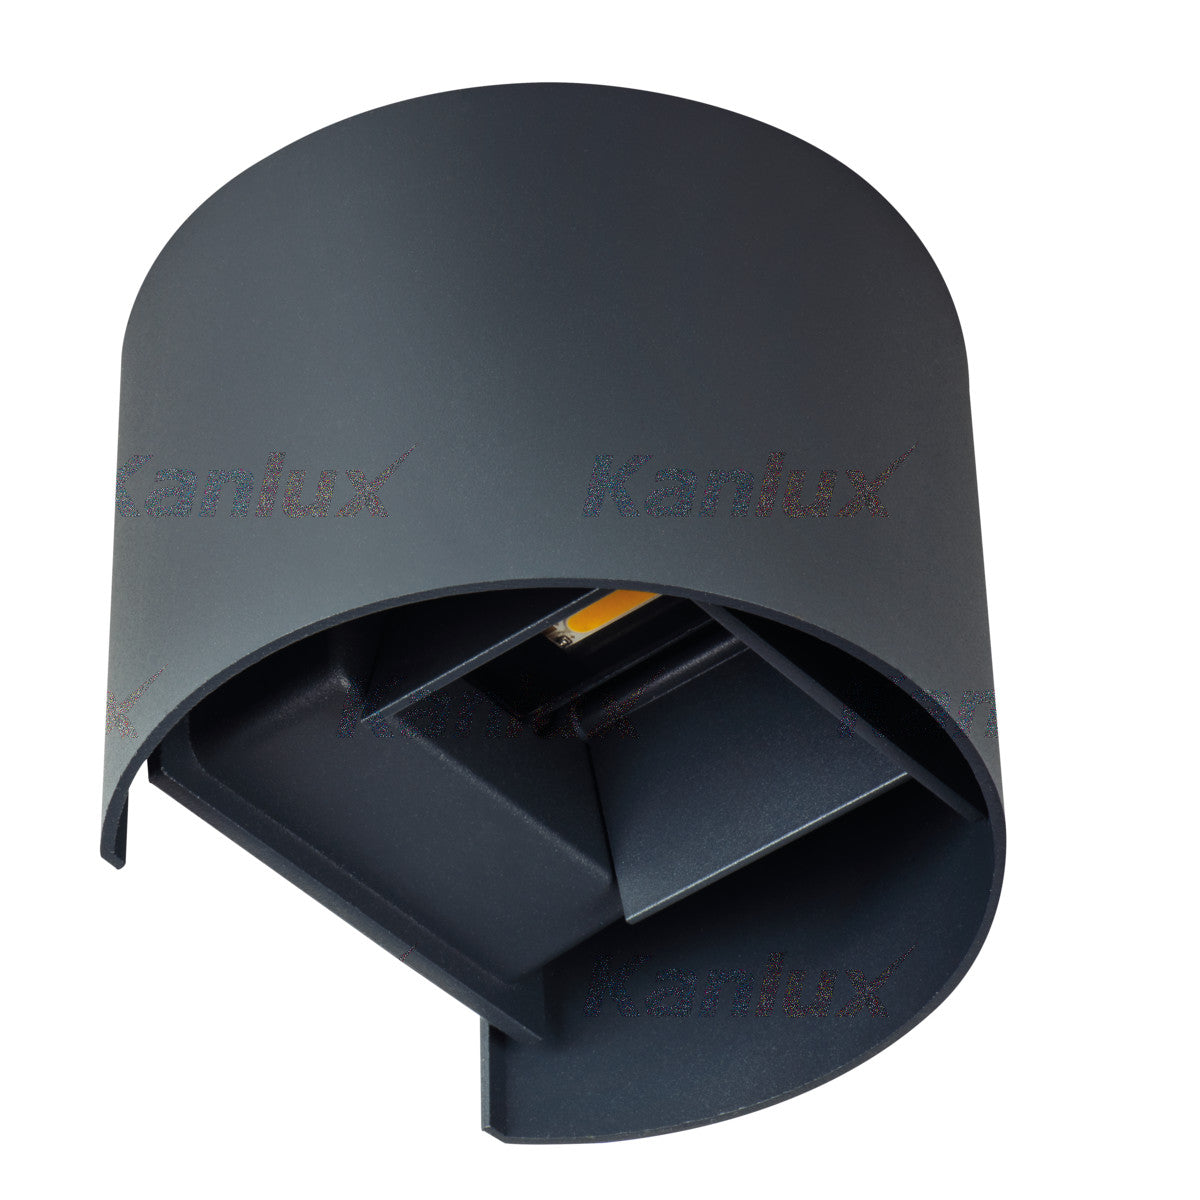 Kanlux REKA 7W IP54 LED Adjustable Wall Mounted Up & Down Angle Light Outdoor